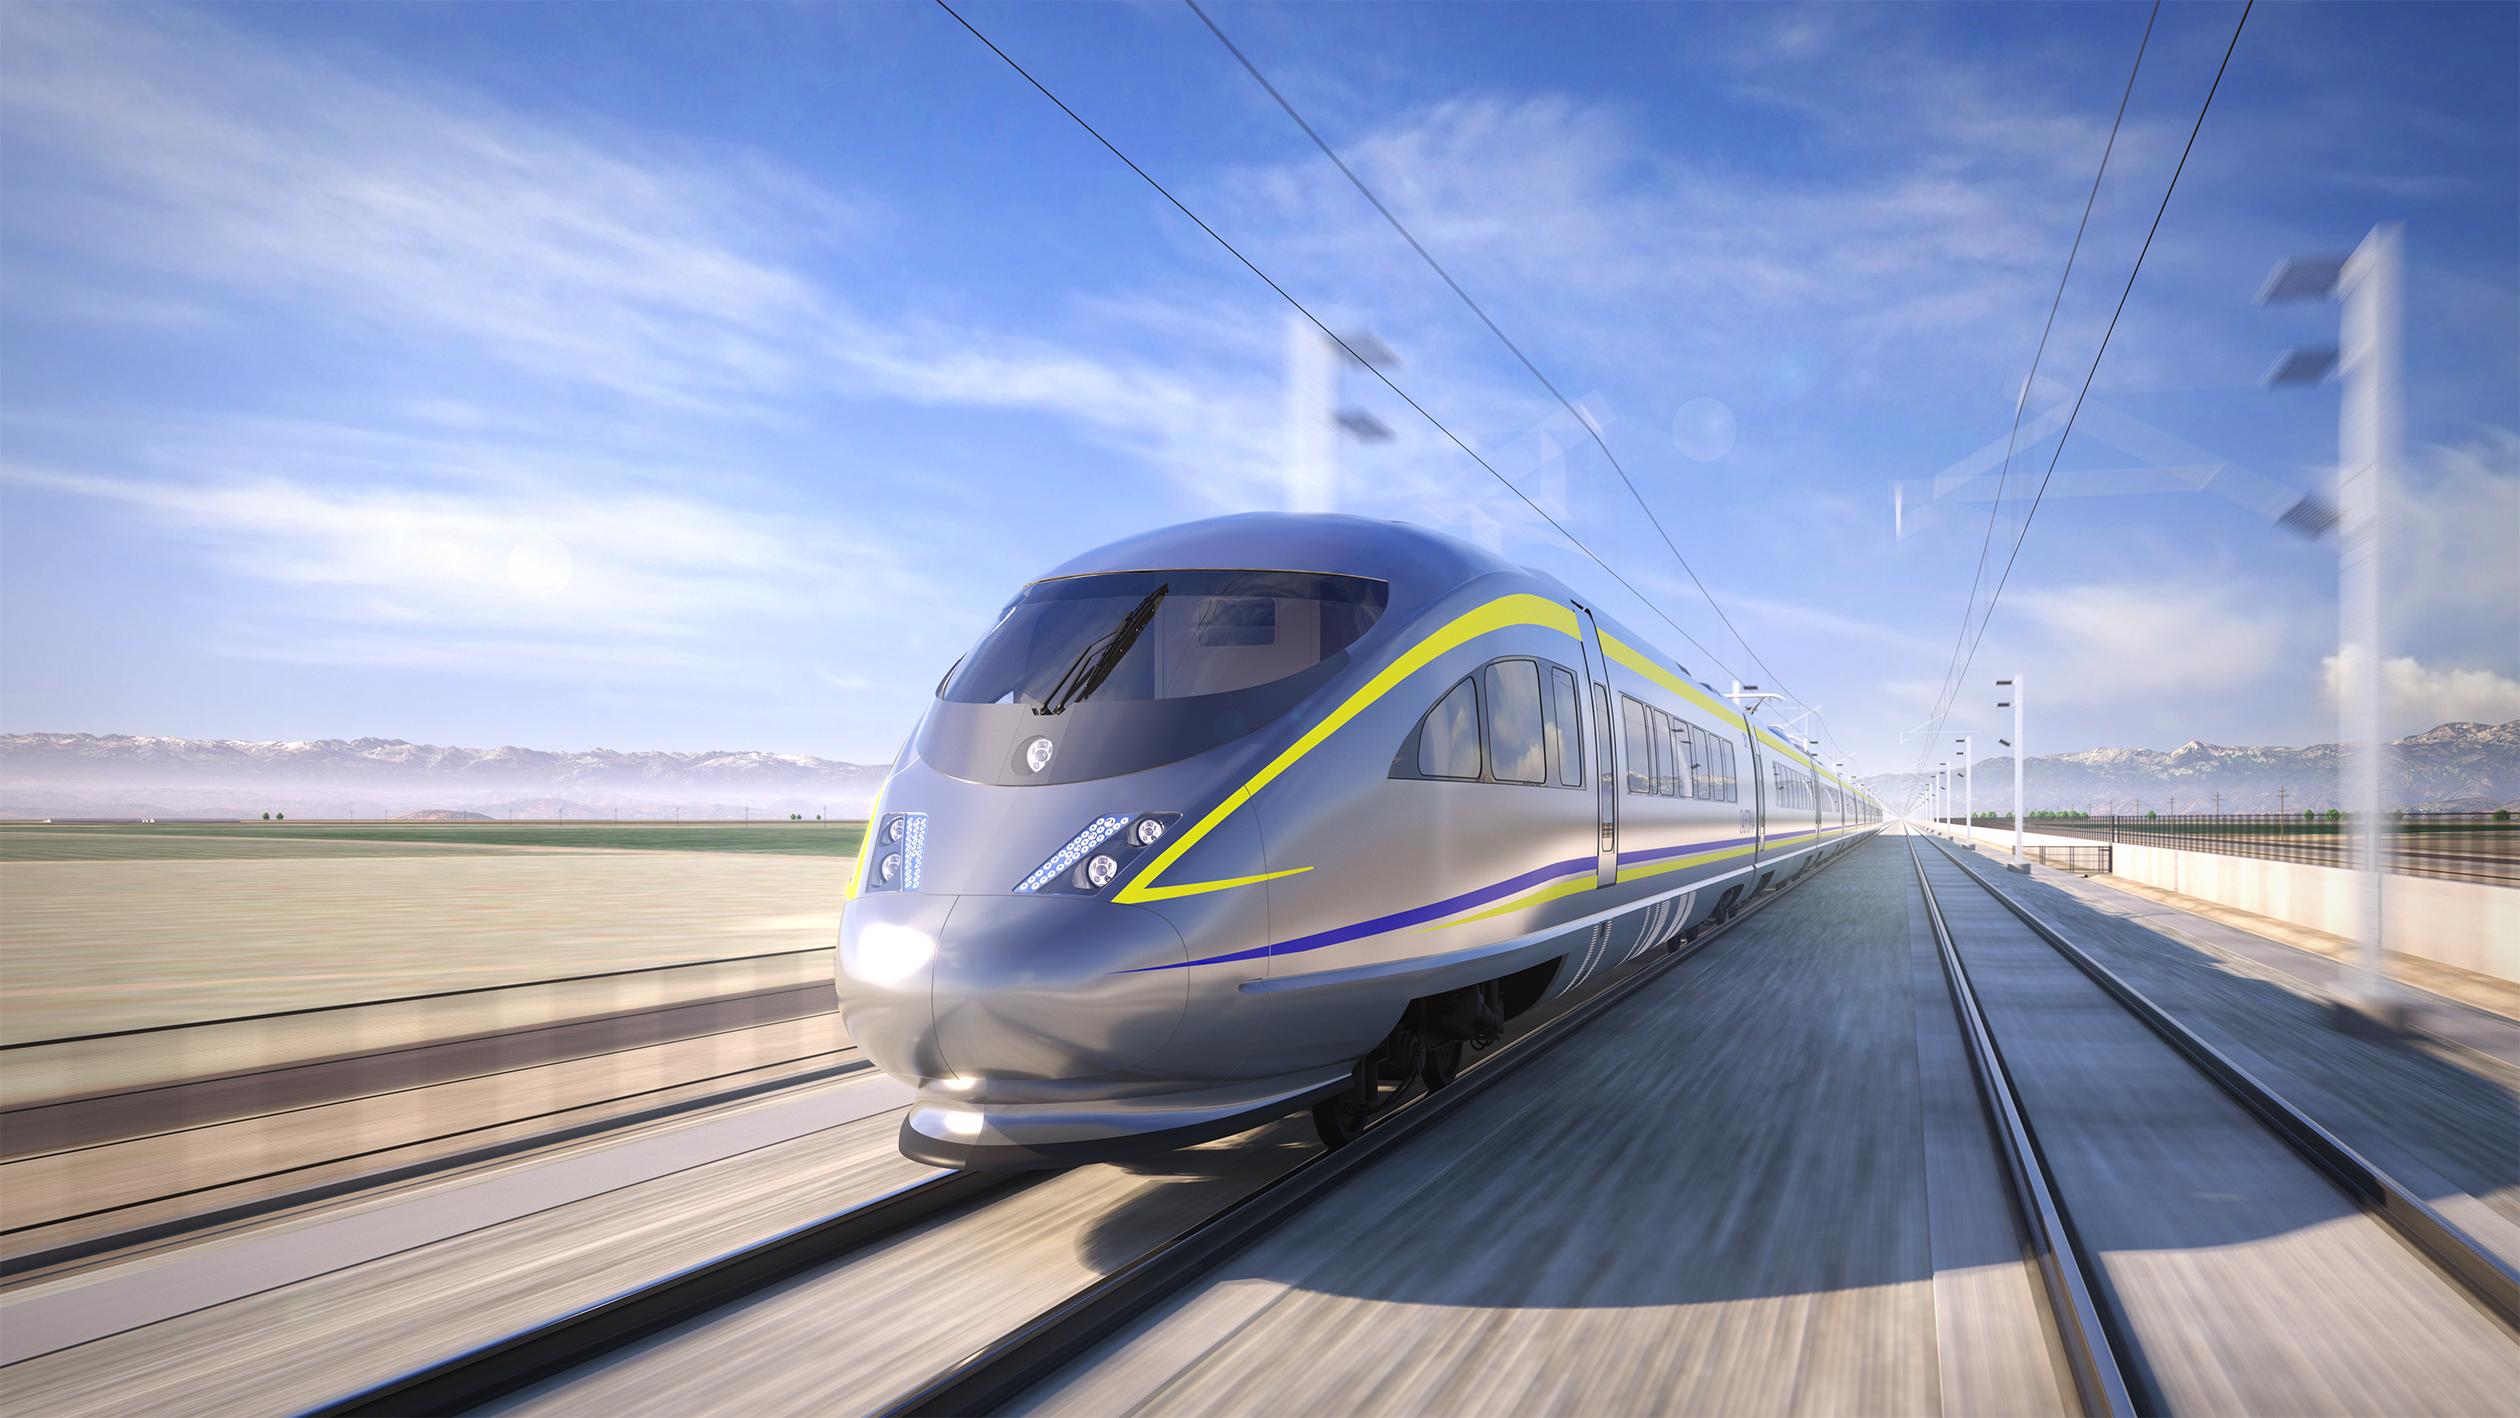 Alstom and Siemens Named Potential Suppliers for California’s High-Speed Trains